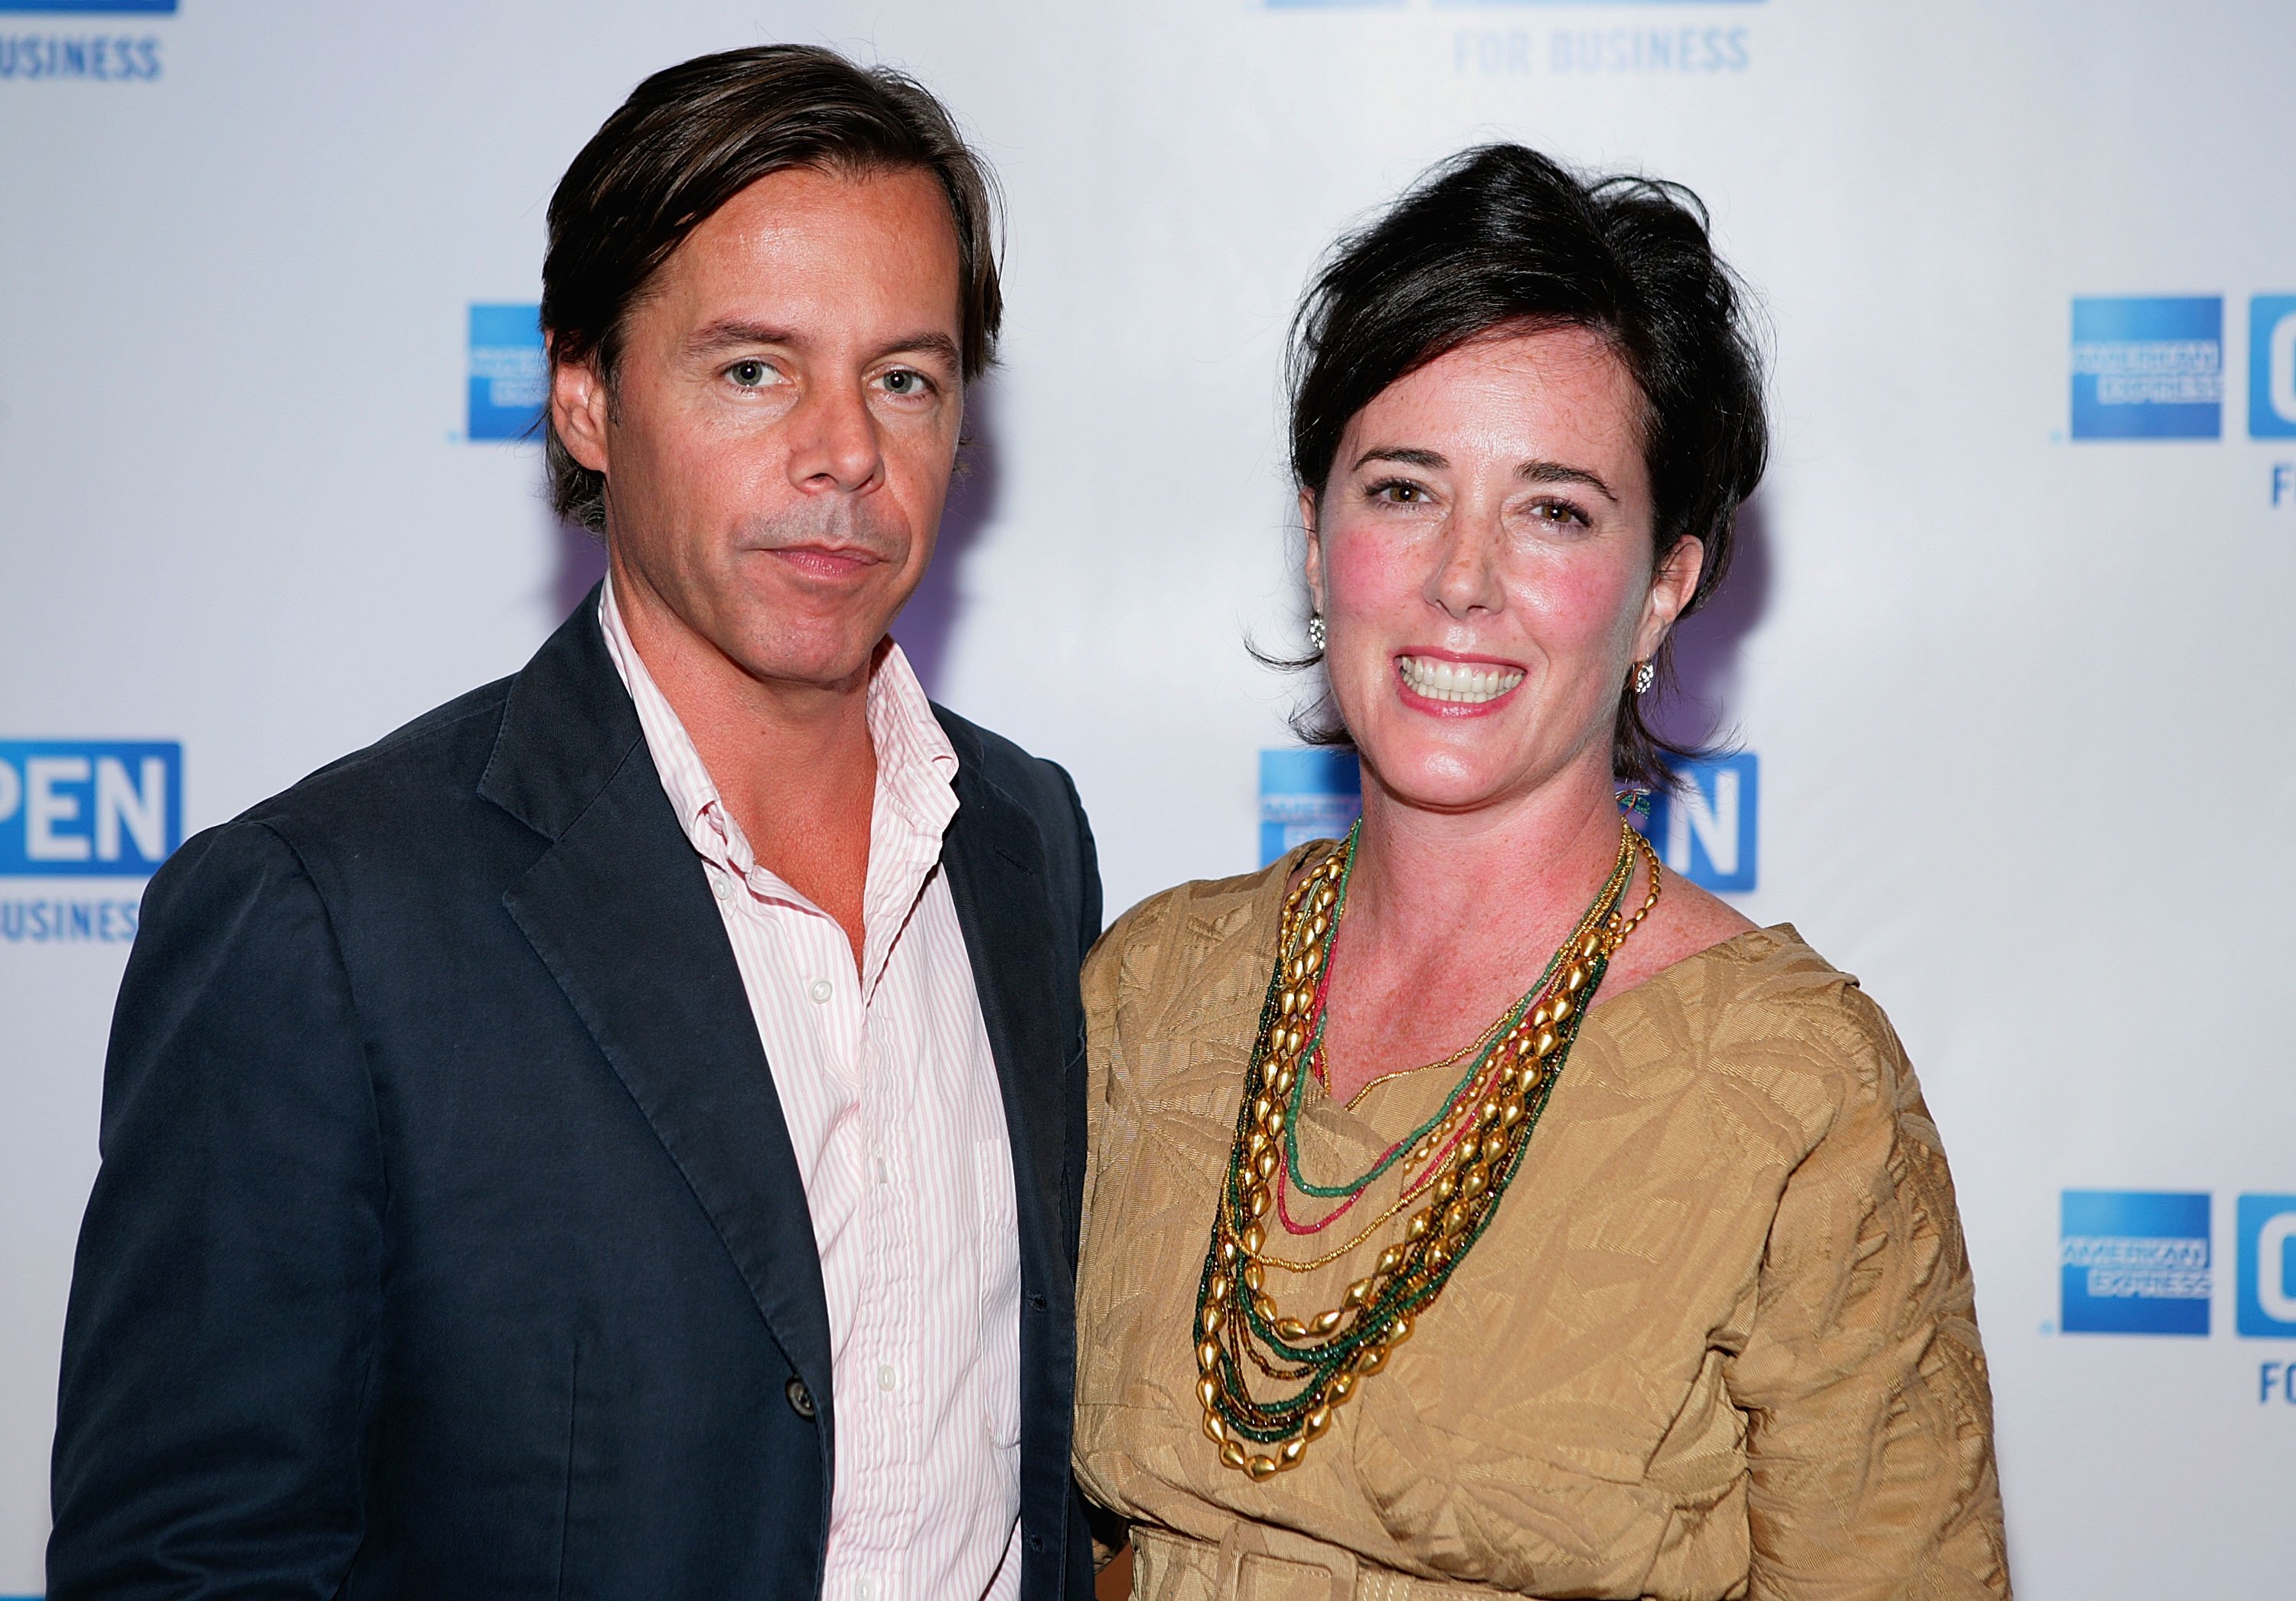 Andy Spade and Kate Spade.